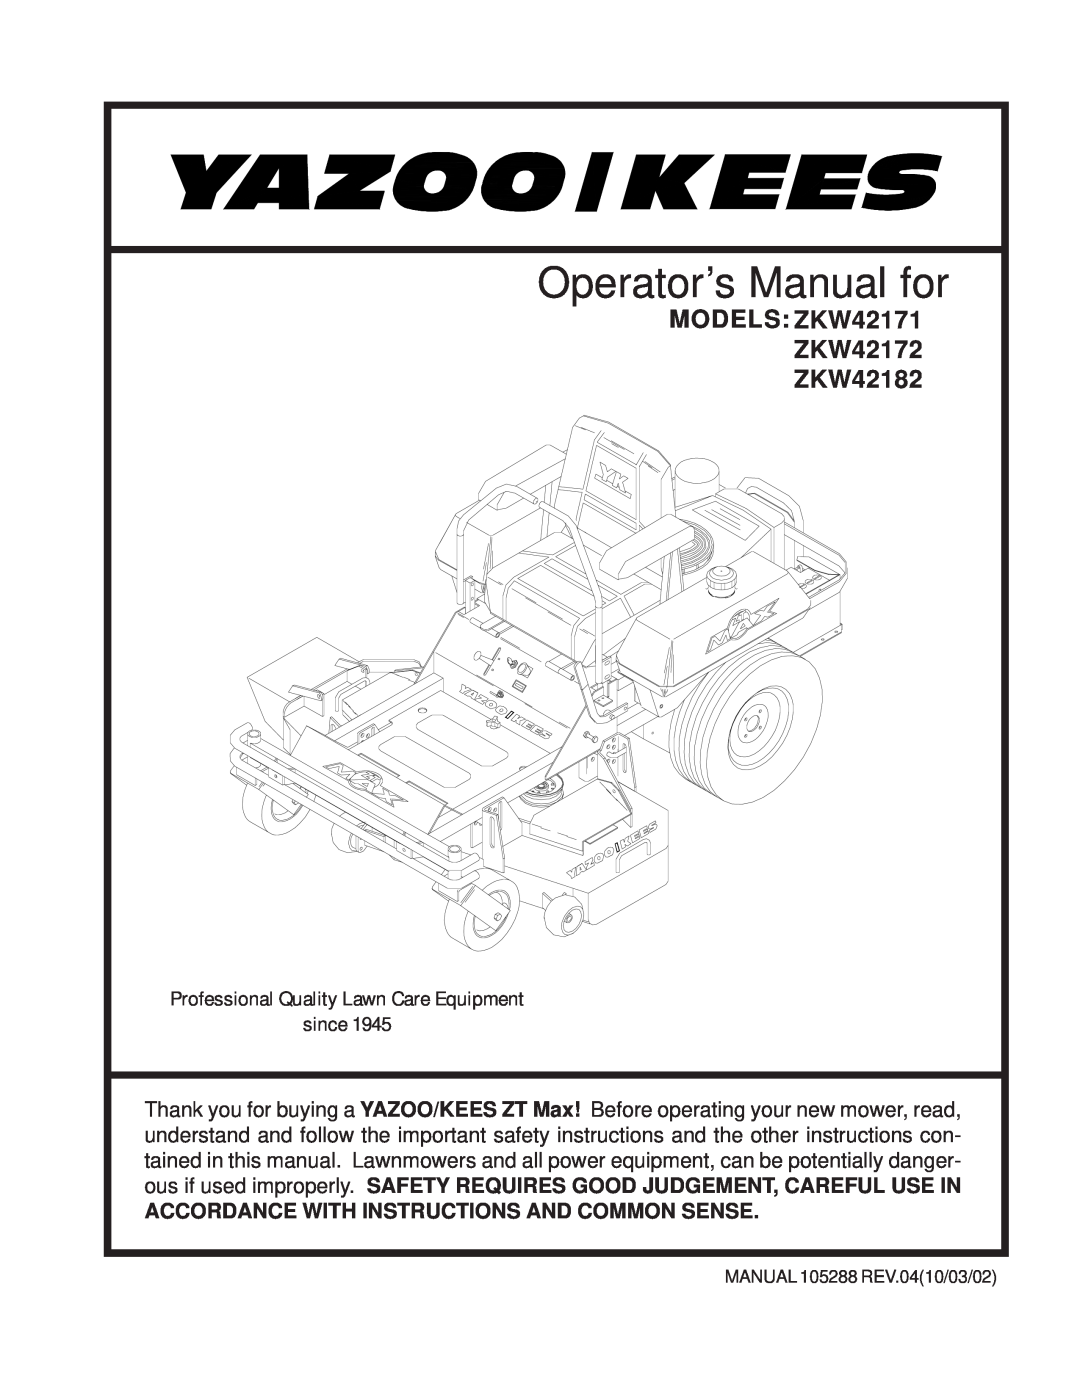 Yazoo/Kees ZKW42171, ZKW42172, ZKW42182 important safety instructions Operator’s Manual for 